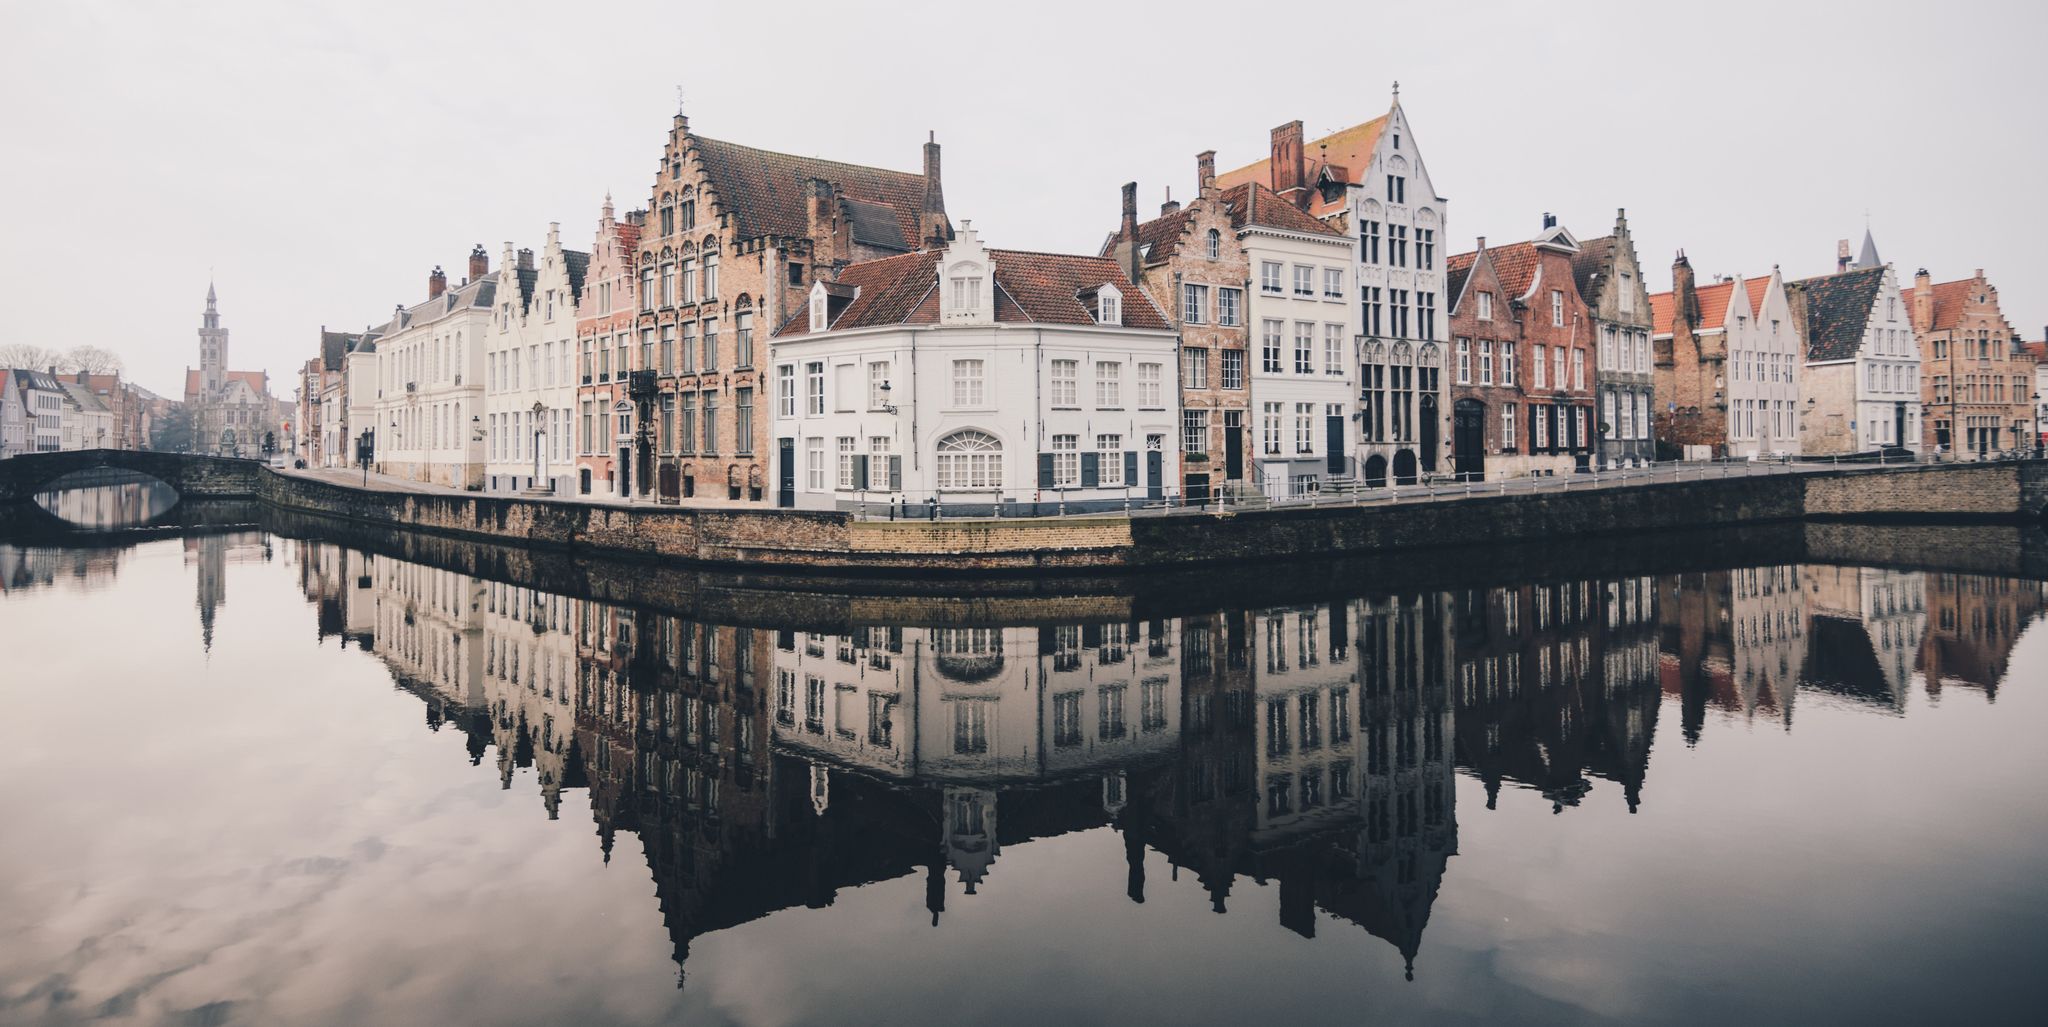 Reflection, Water, Waterway, Sky, Town, Architecture, Building, Water castle, River, Moat, 